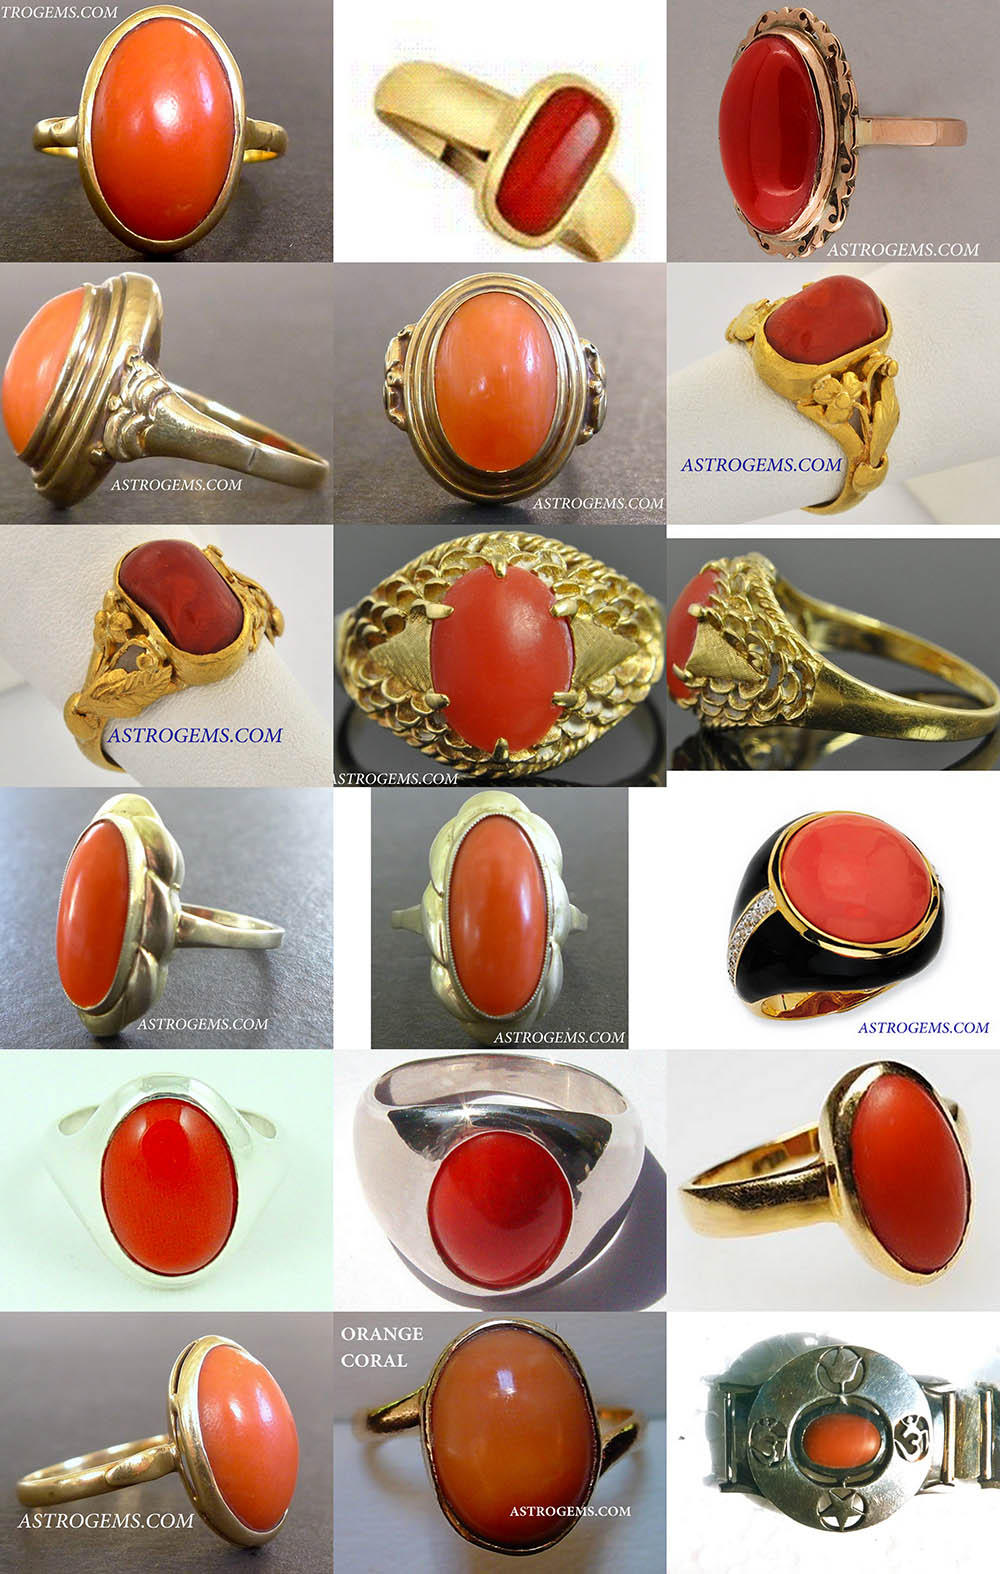 vedic red coral astrological rings